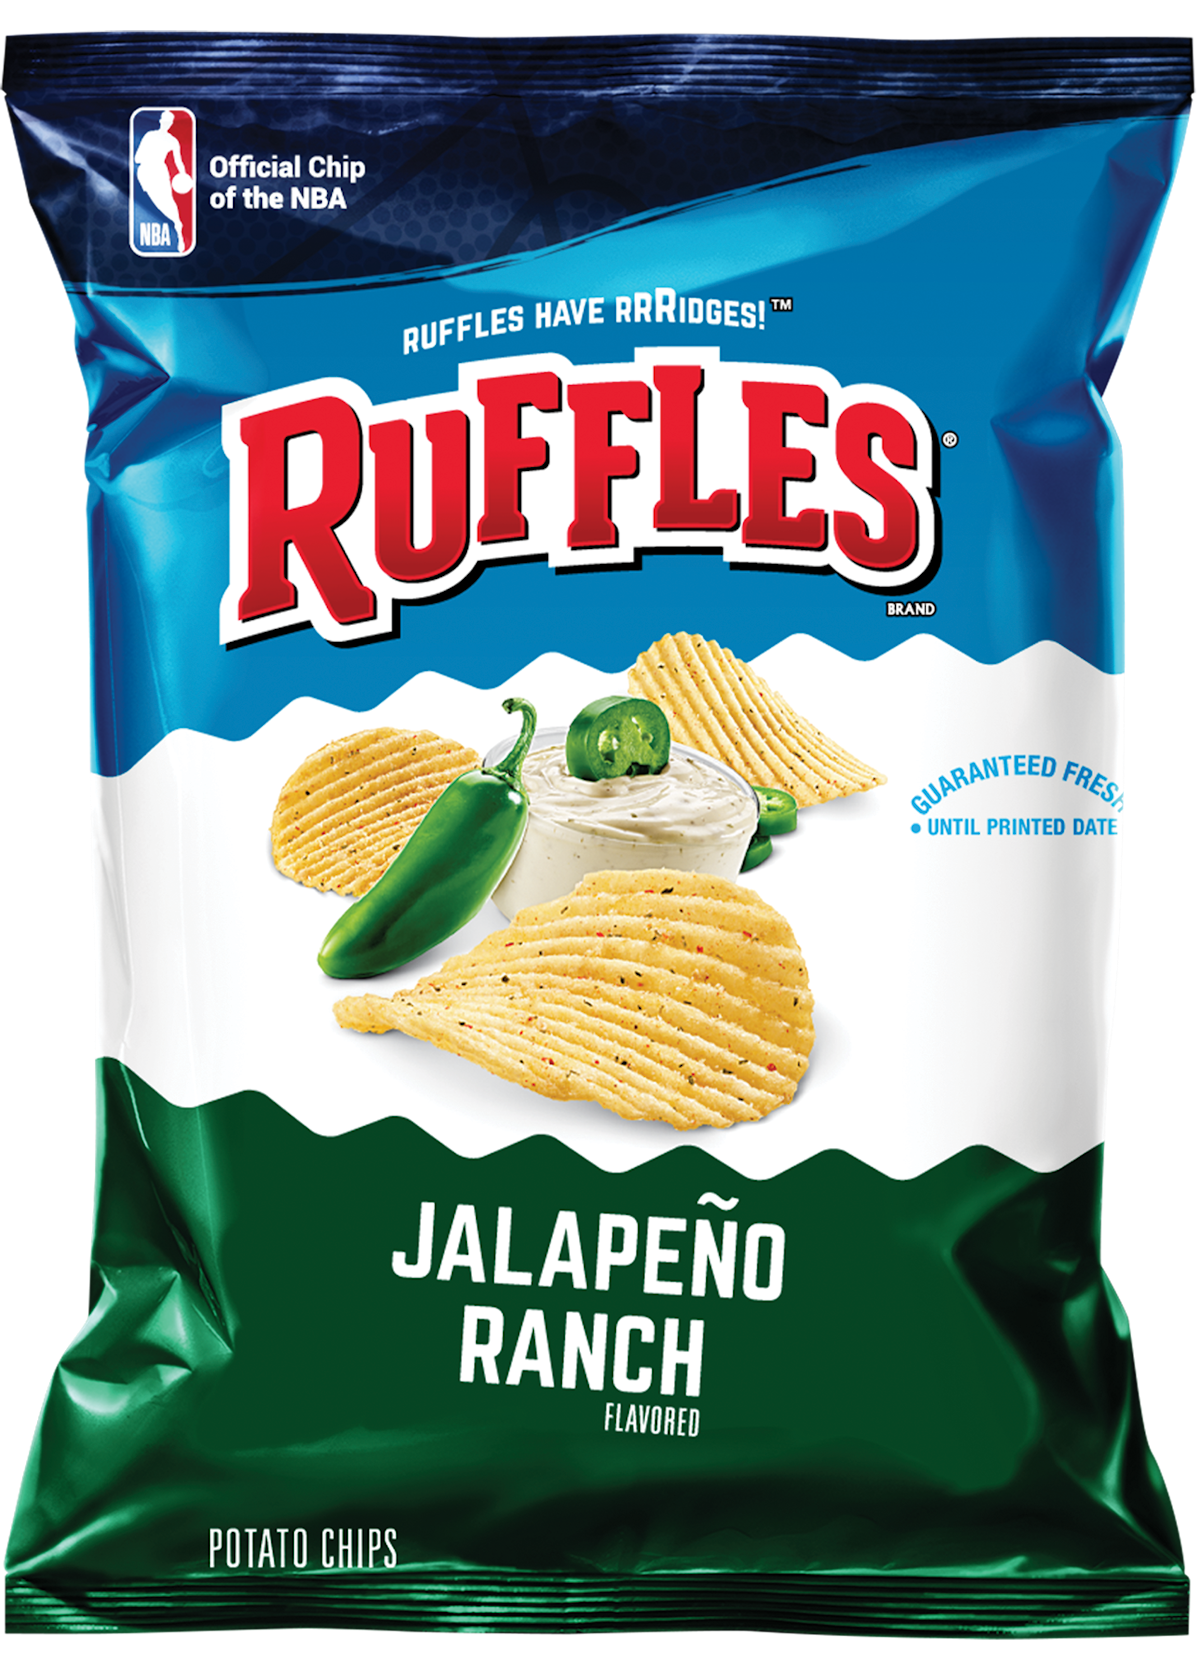 Ruffles Jalapeño Ranch Flavored Potato Chips From: PepsiCo Foodservice